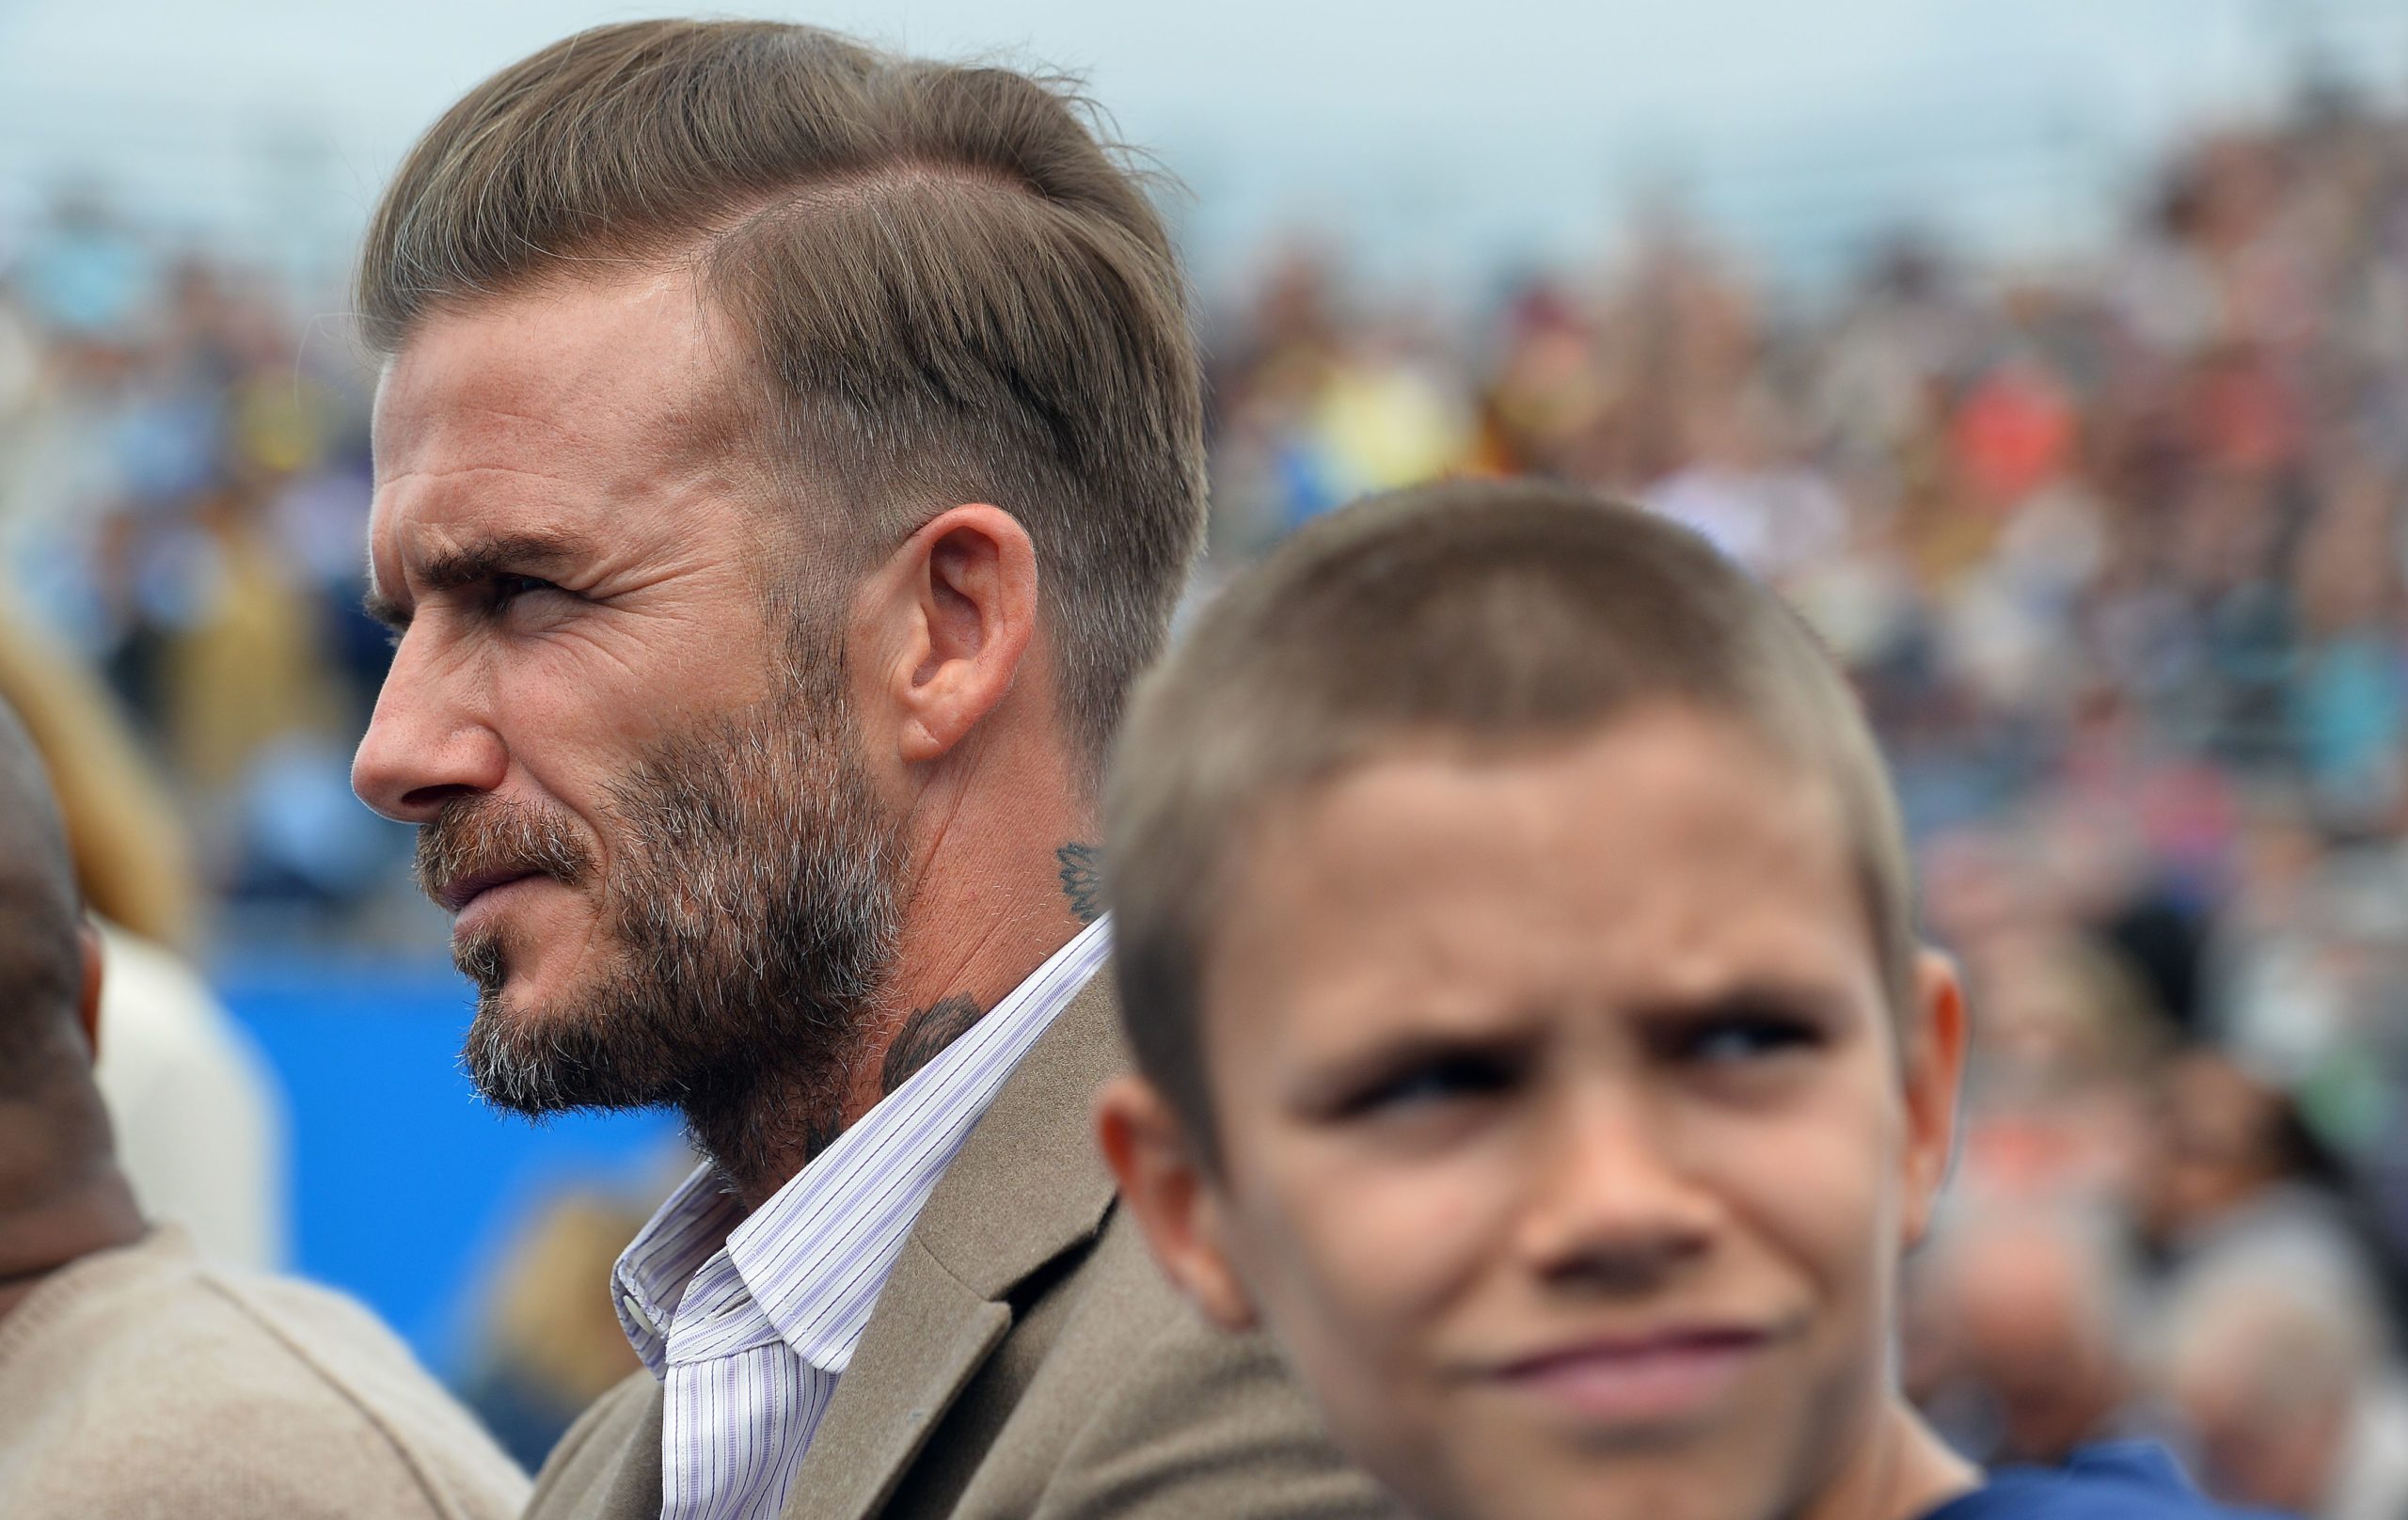 Former English footballer David Beckham and his son Romeo watch the play on centre court at the ATP Aegon Championships tennis tournament at the Queen's Club in west London on June 14, 2016. / AFP PHOTO / GLYN KIRK (Photo credit should read GLYN KIRK/AFP via Getty Images)